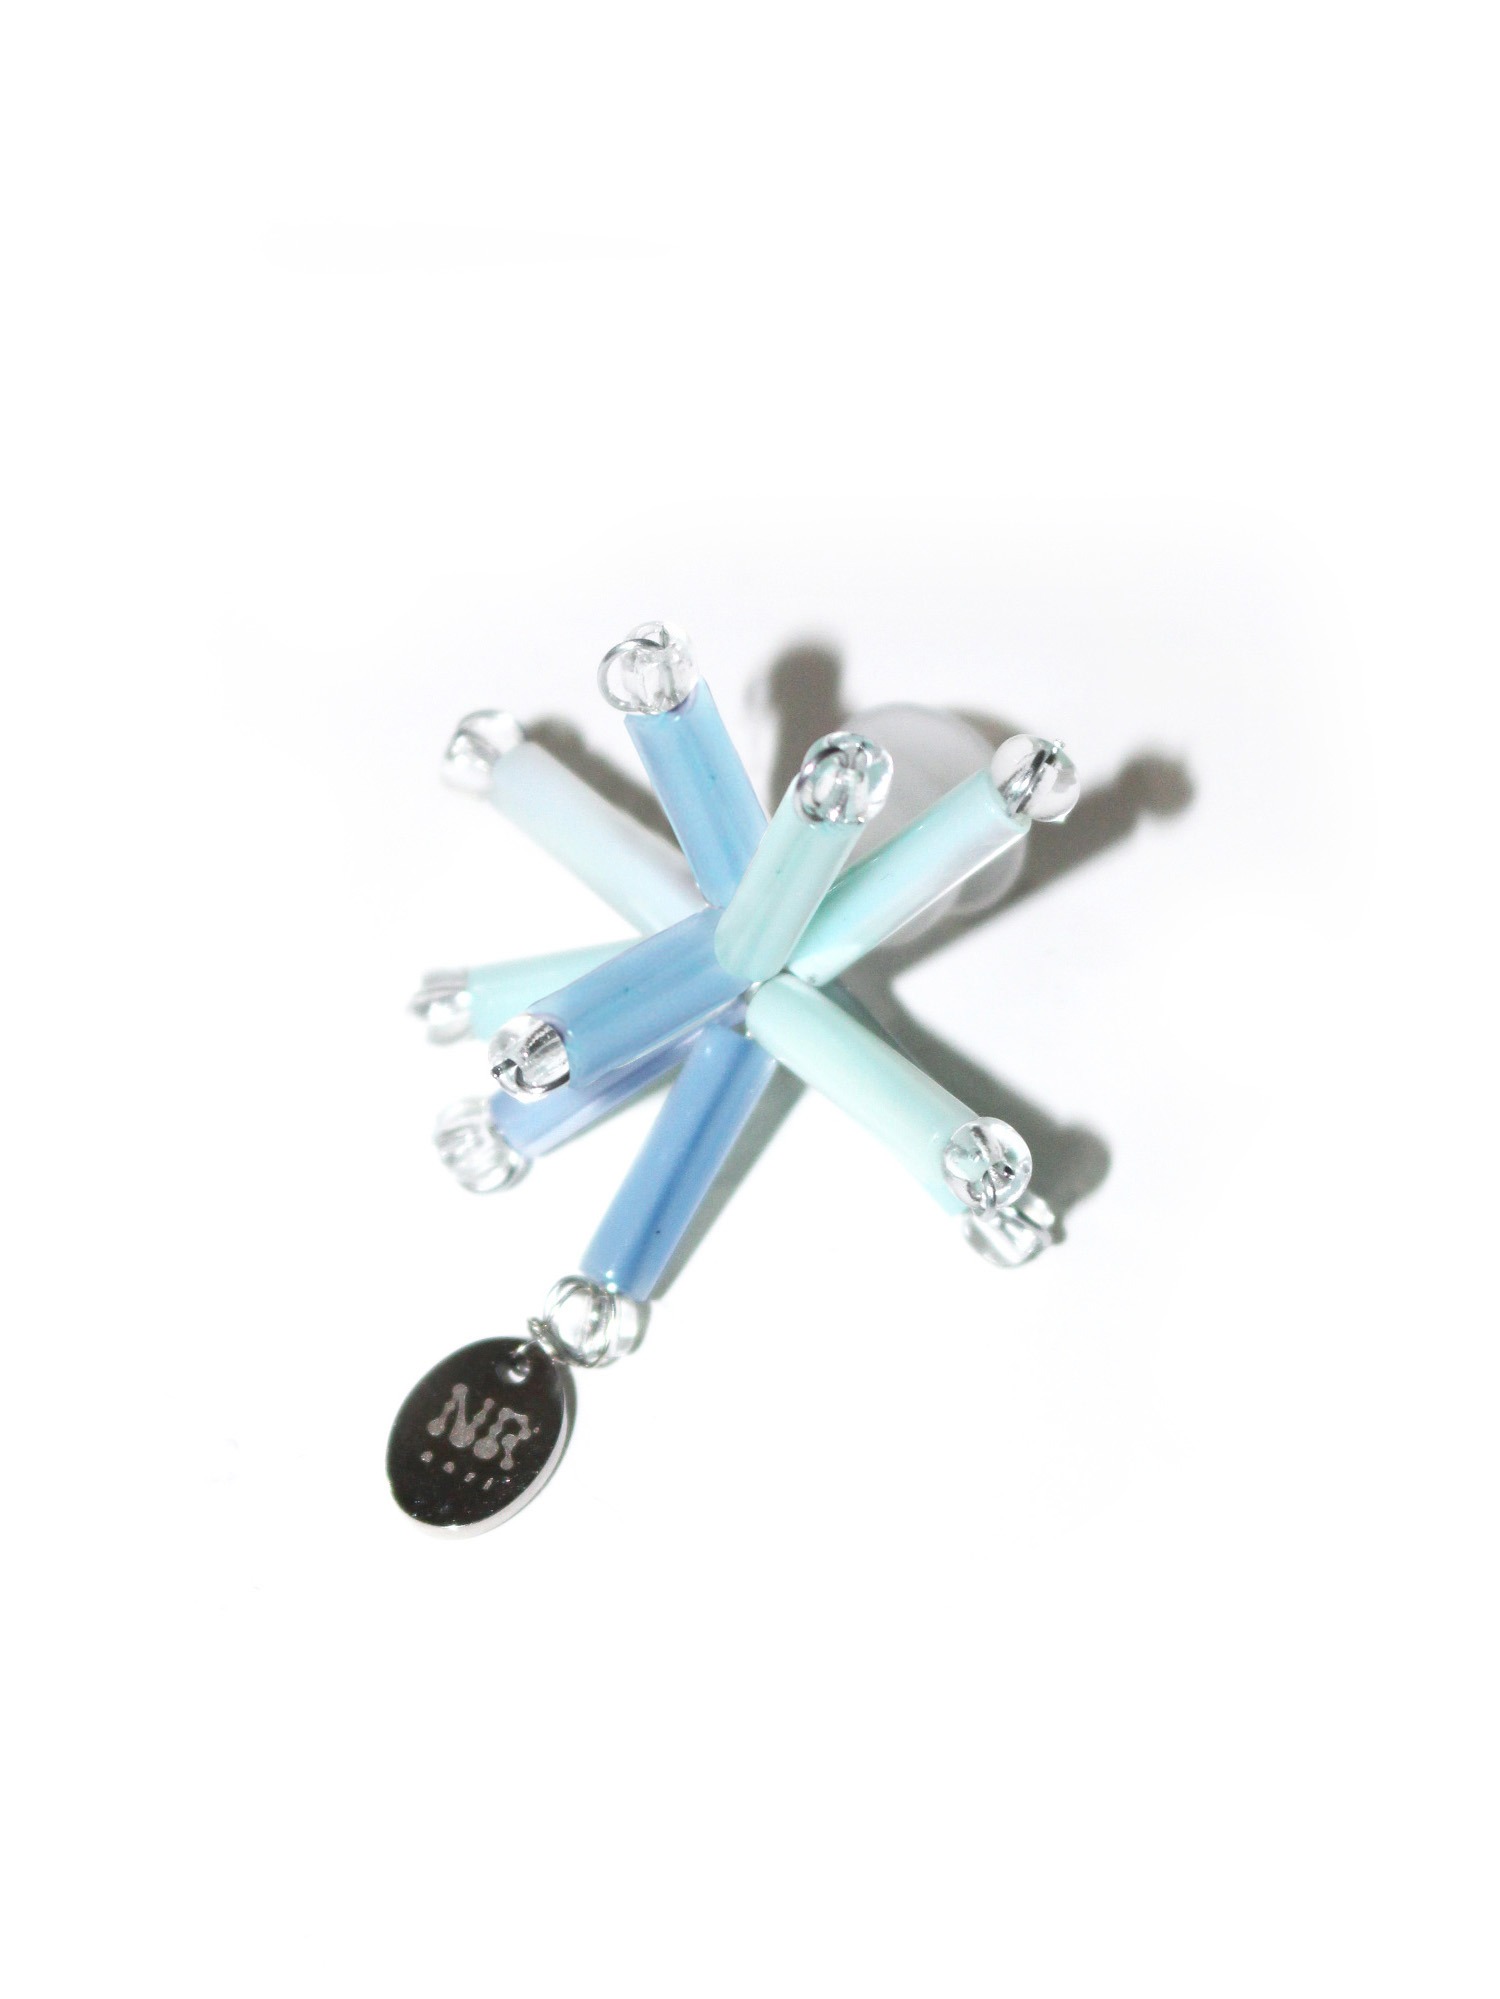 [COUTURE] Affectif crystallus charm _ mixed blue